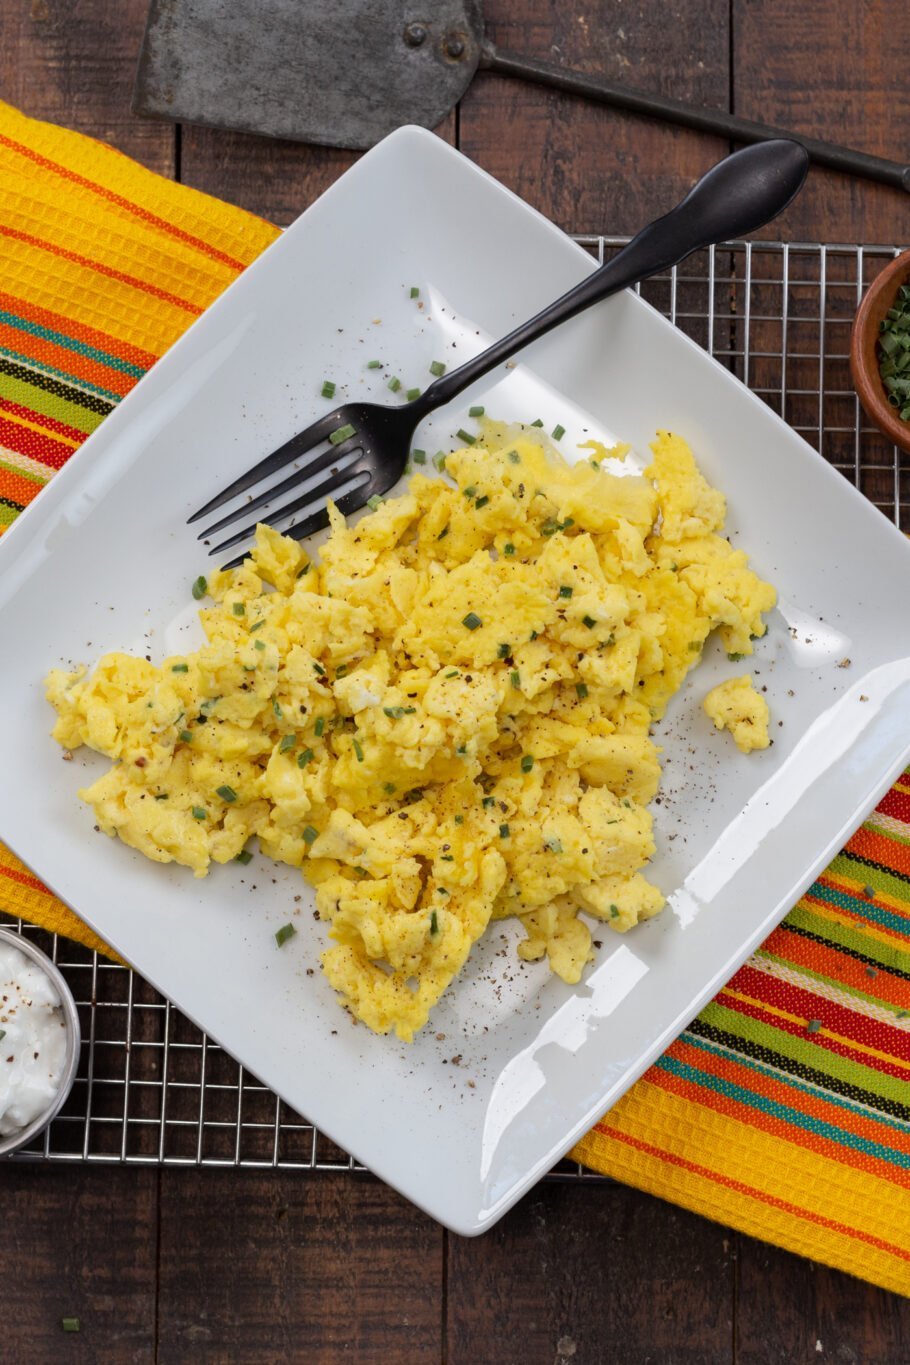 https://media.theproteinchef.co/wp-content/uploads/2022/03/Healthy-Scrambled-Eggs-with-Cottage-Cheese-Plate-910x1365.jpg